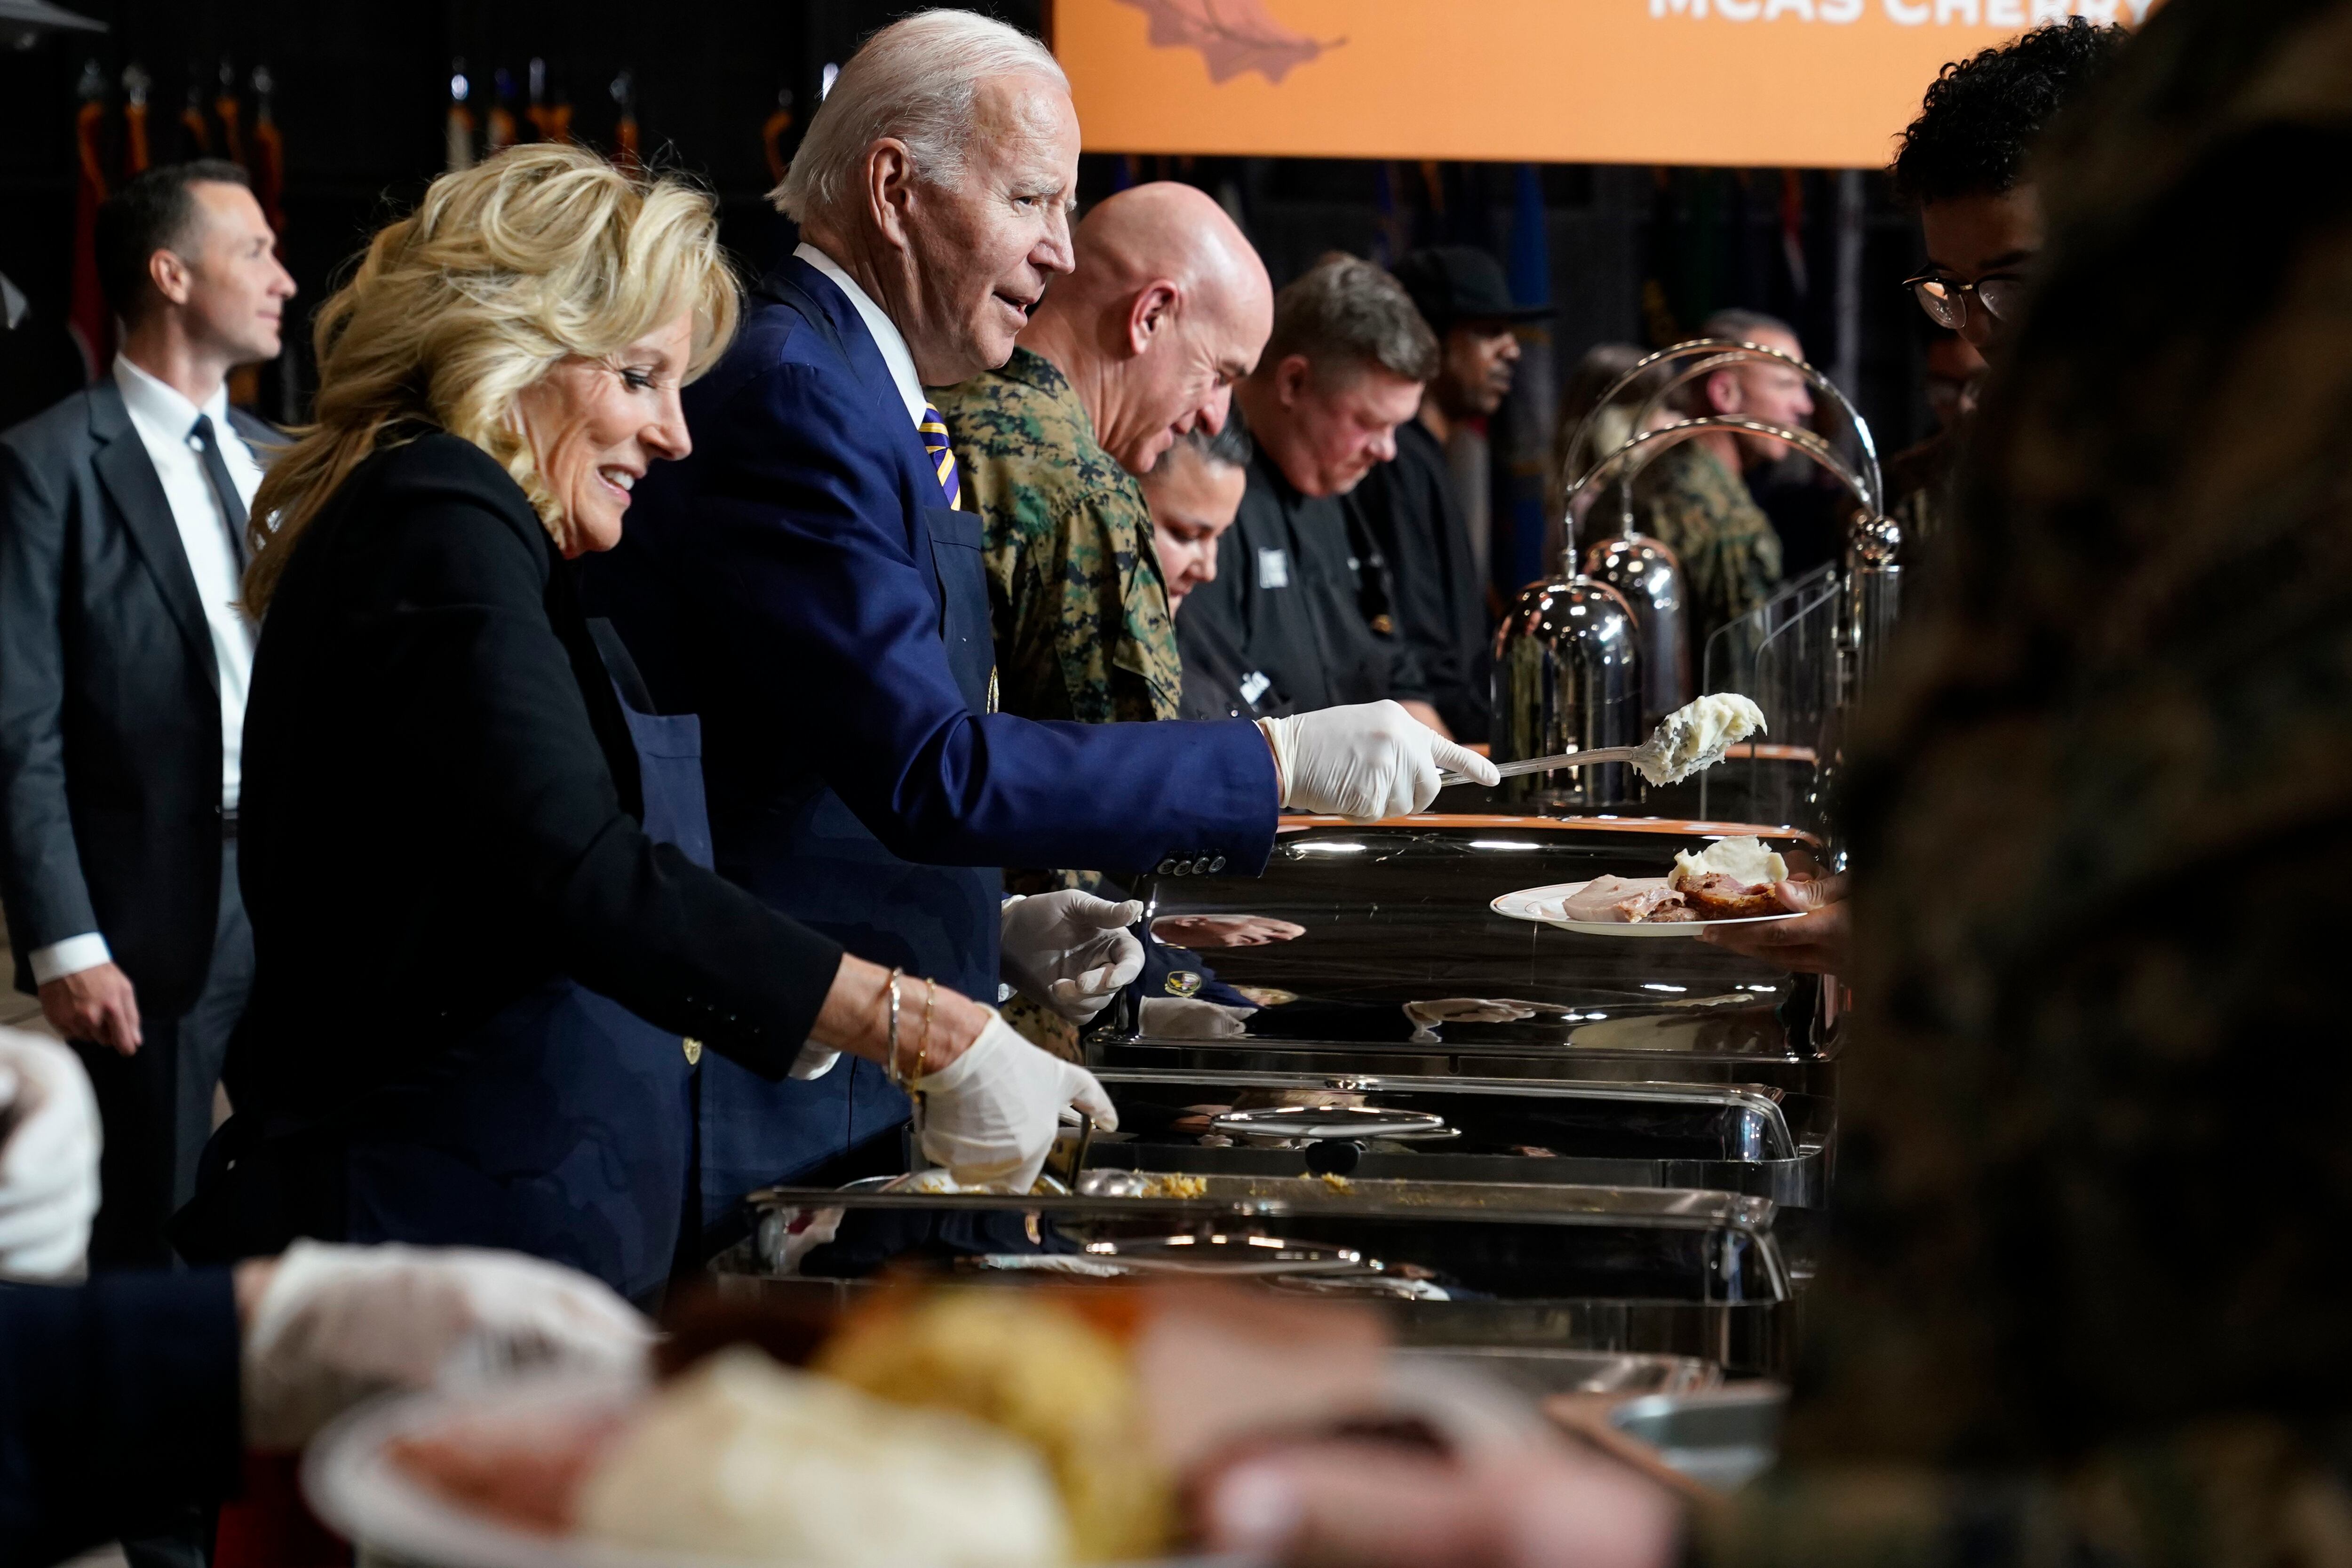 Bidens open holiday season, serve Thanksgiving meal to service